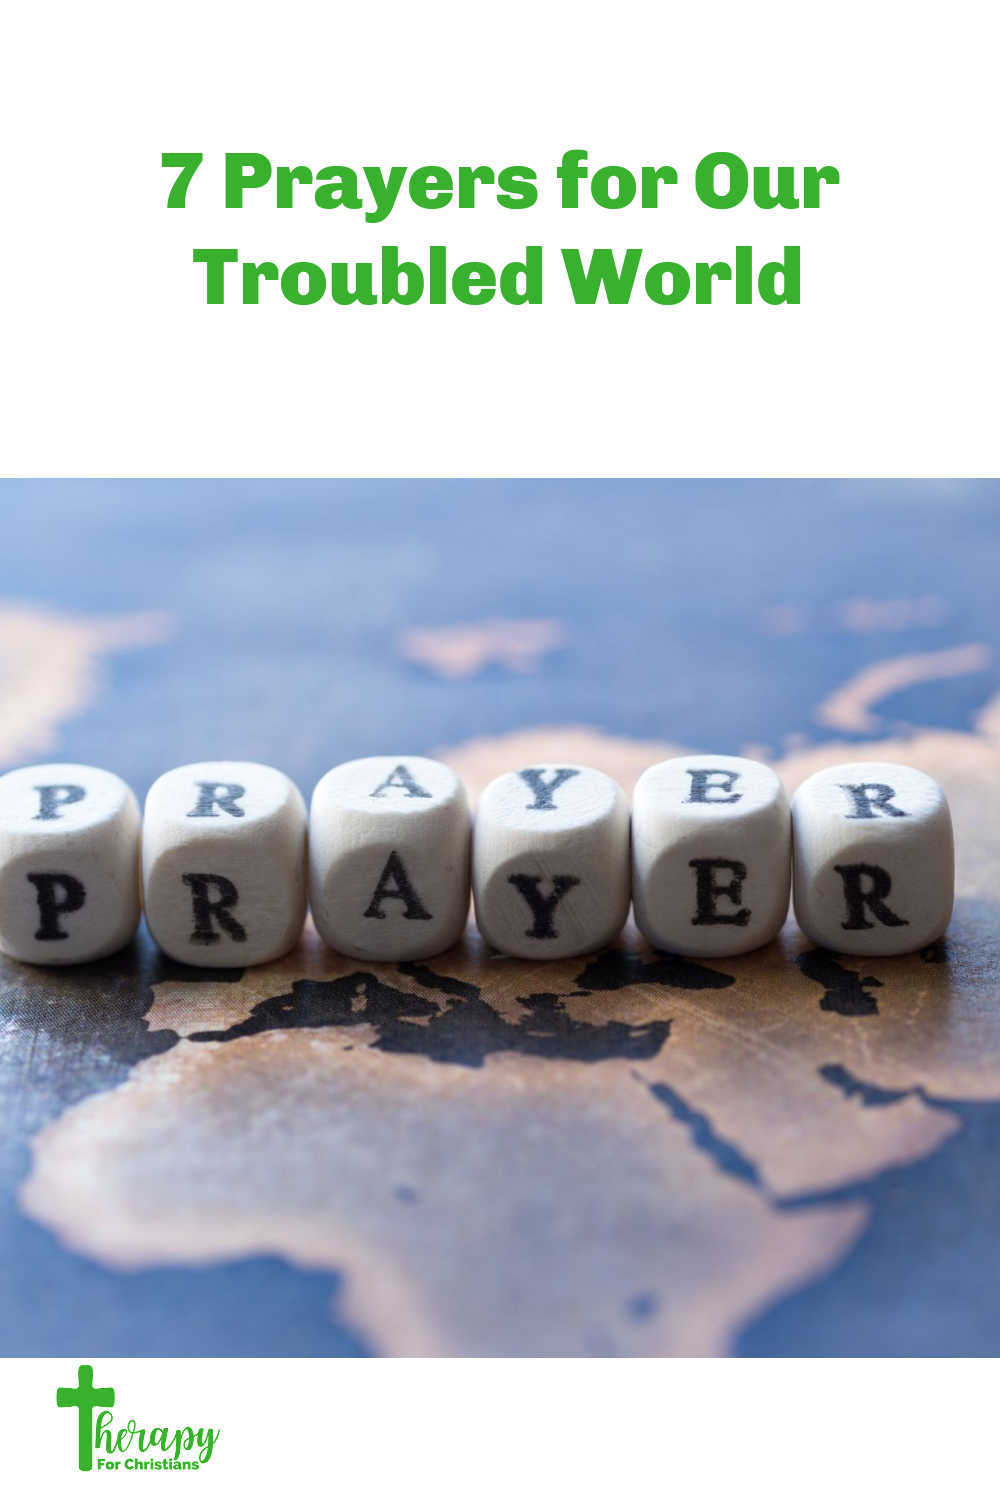 Prayers for our Troubled World Pinterest Image